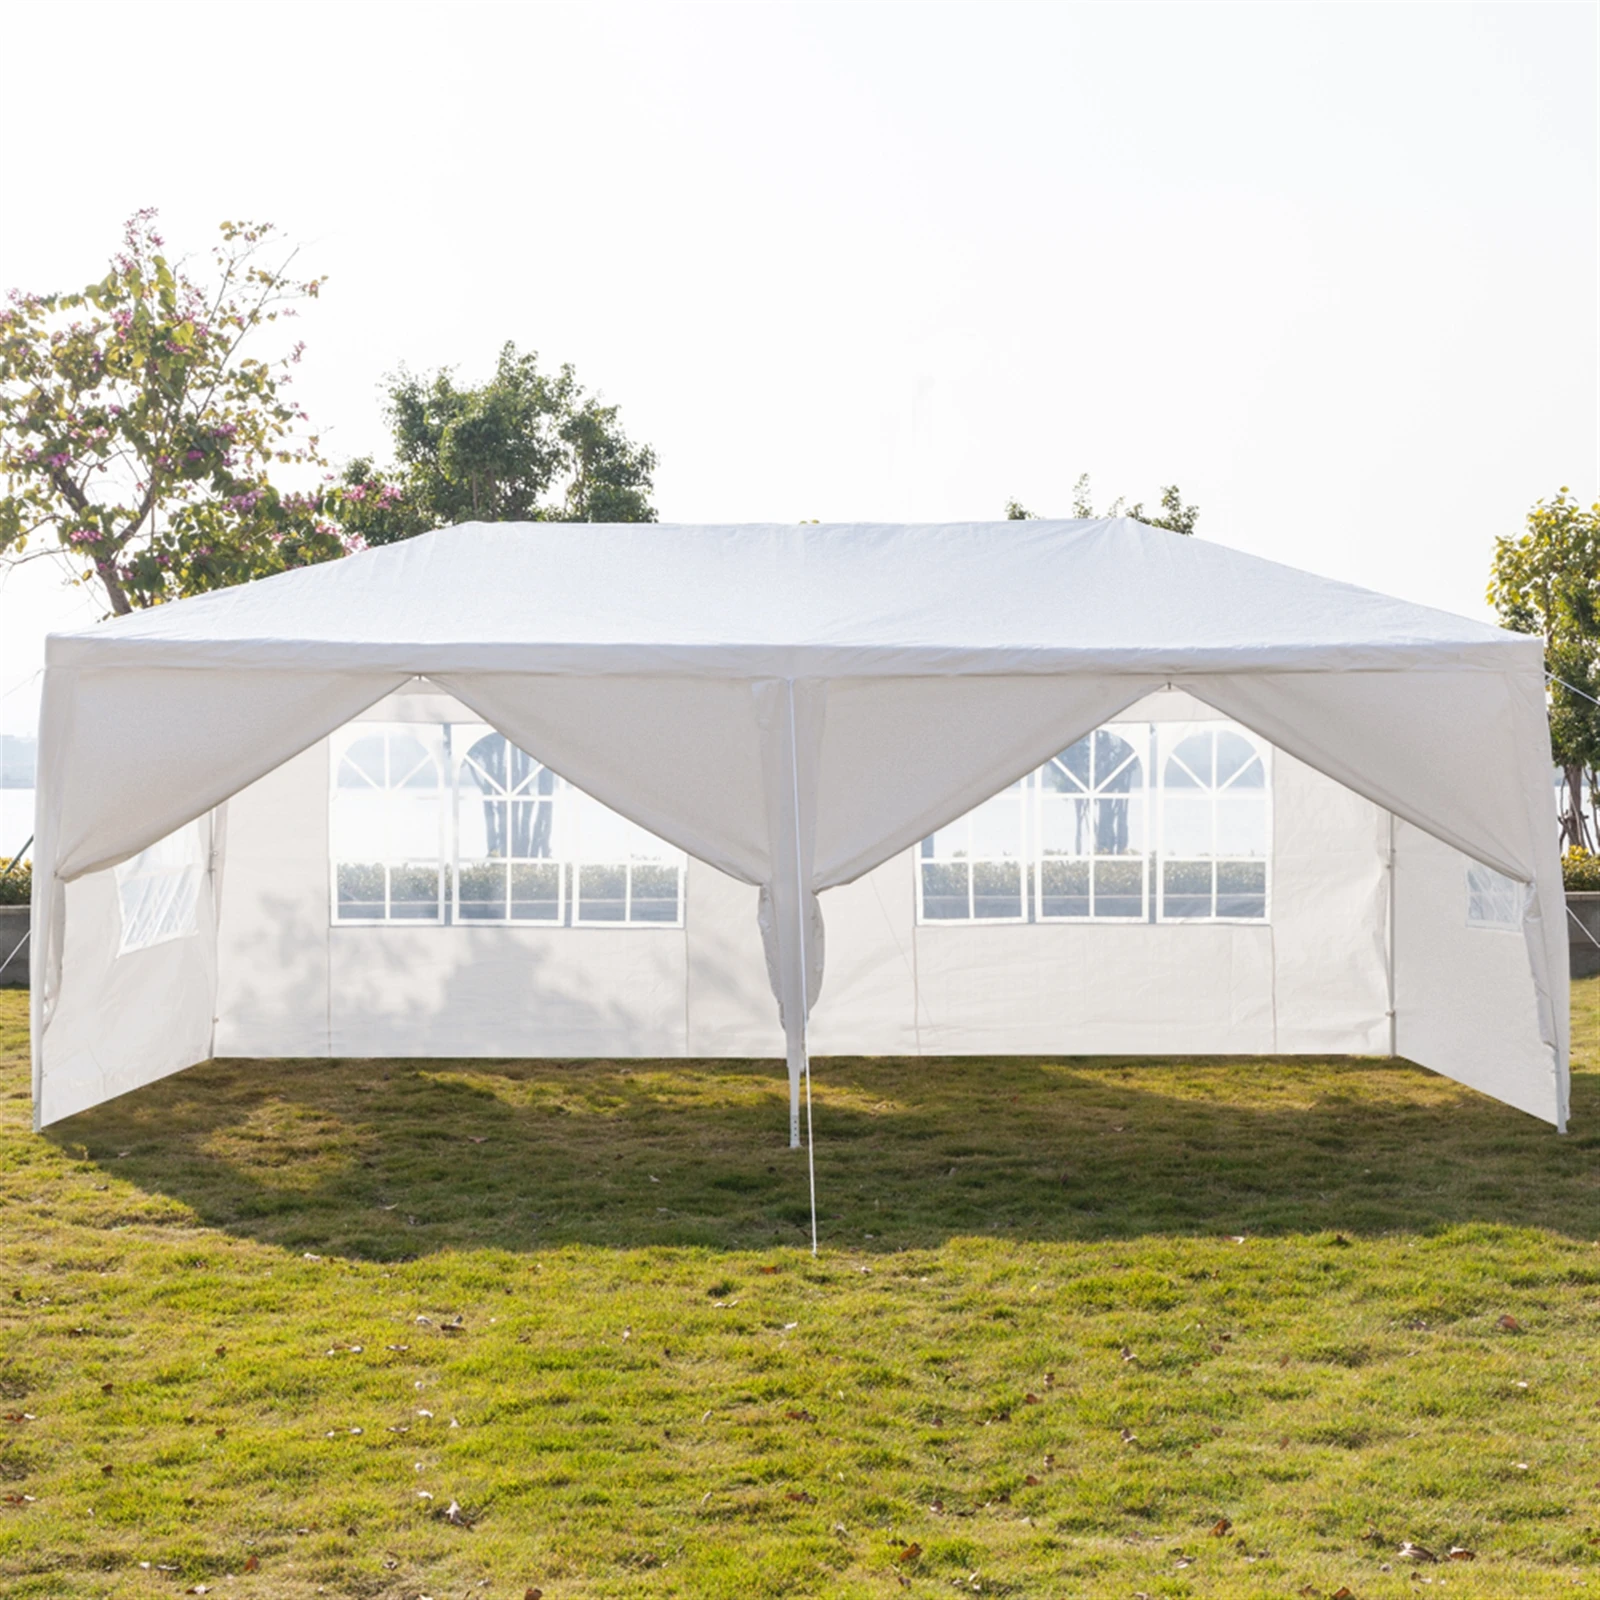 

3 x 6m Six Sides Two Doors Waterproof Event Tent with Spiral Tubes White Wedding Tents for Events Party Tent